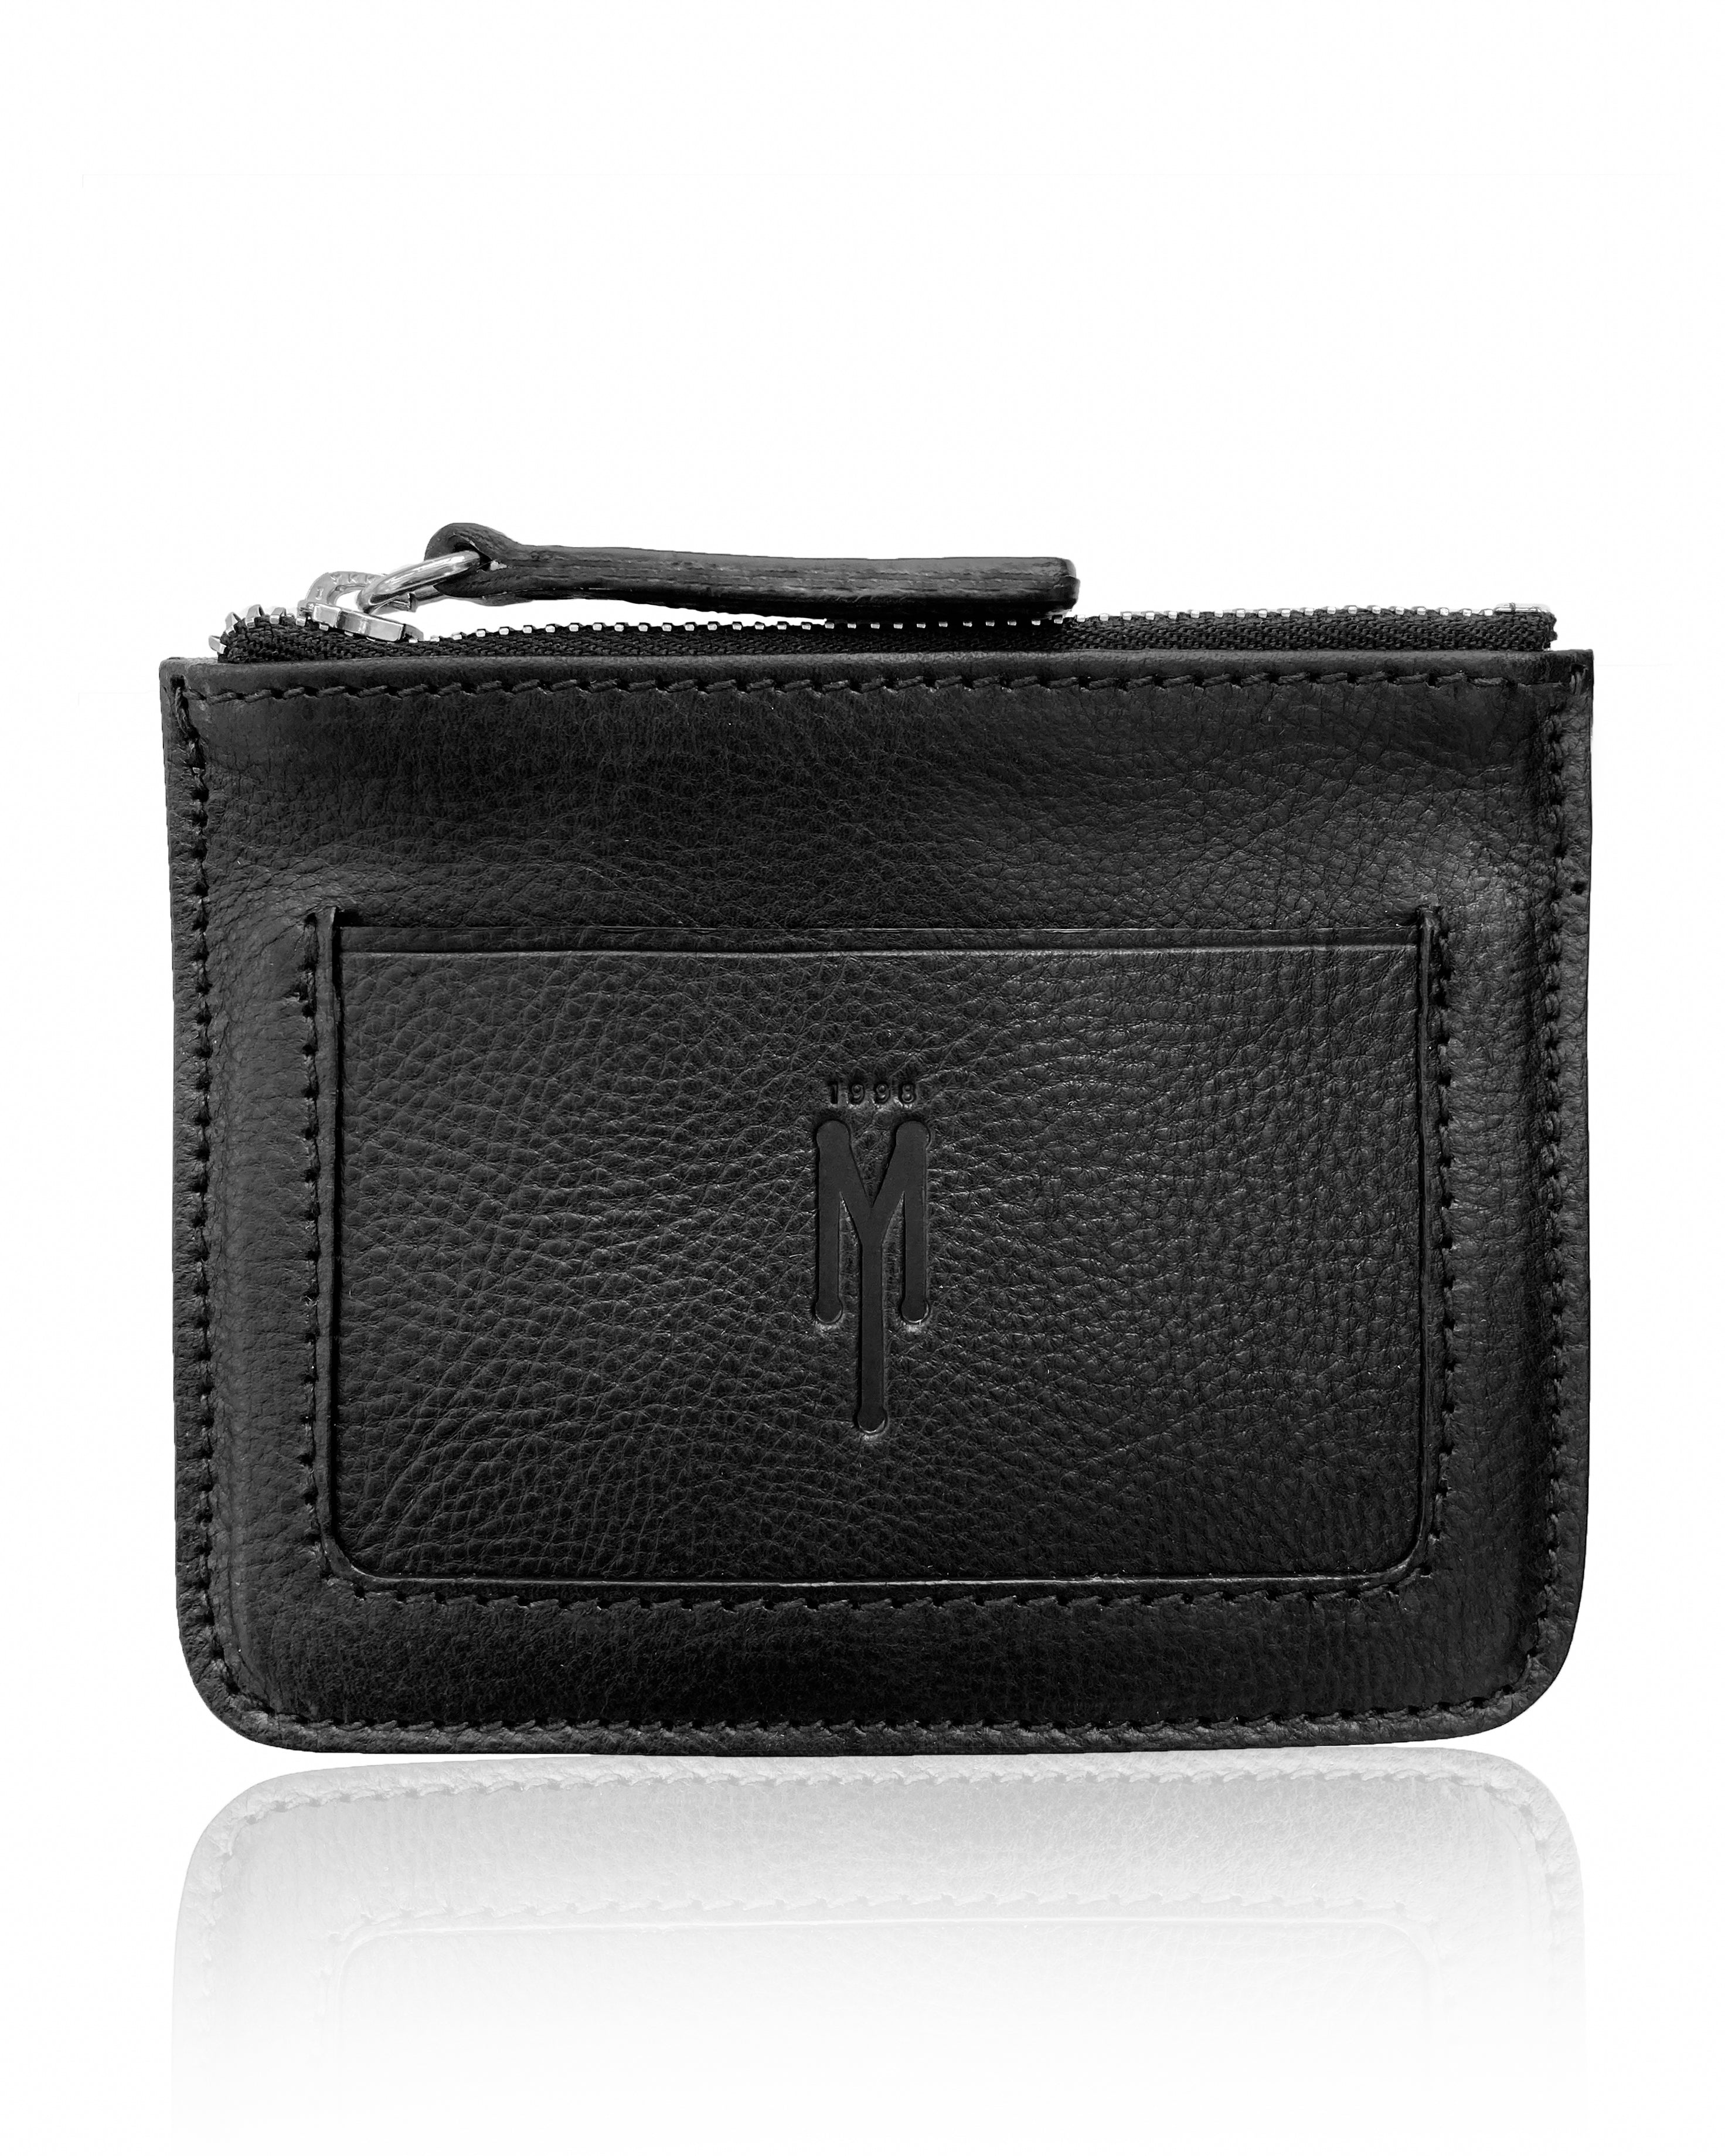 THE MADELEY COMPACT CARD WALLET-BLACK – Madeley